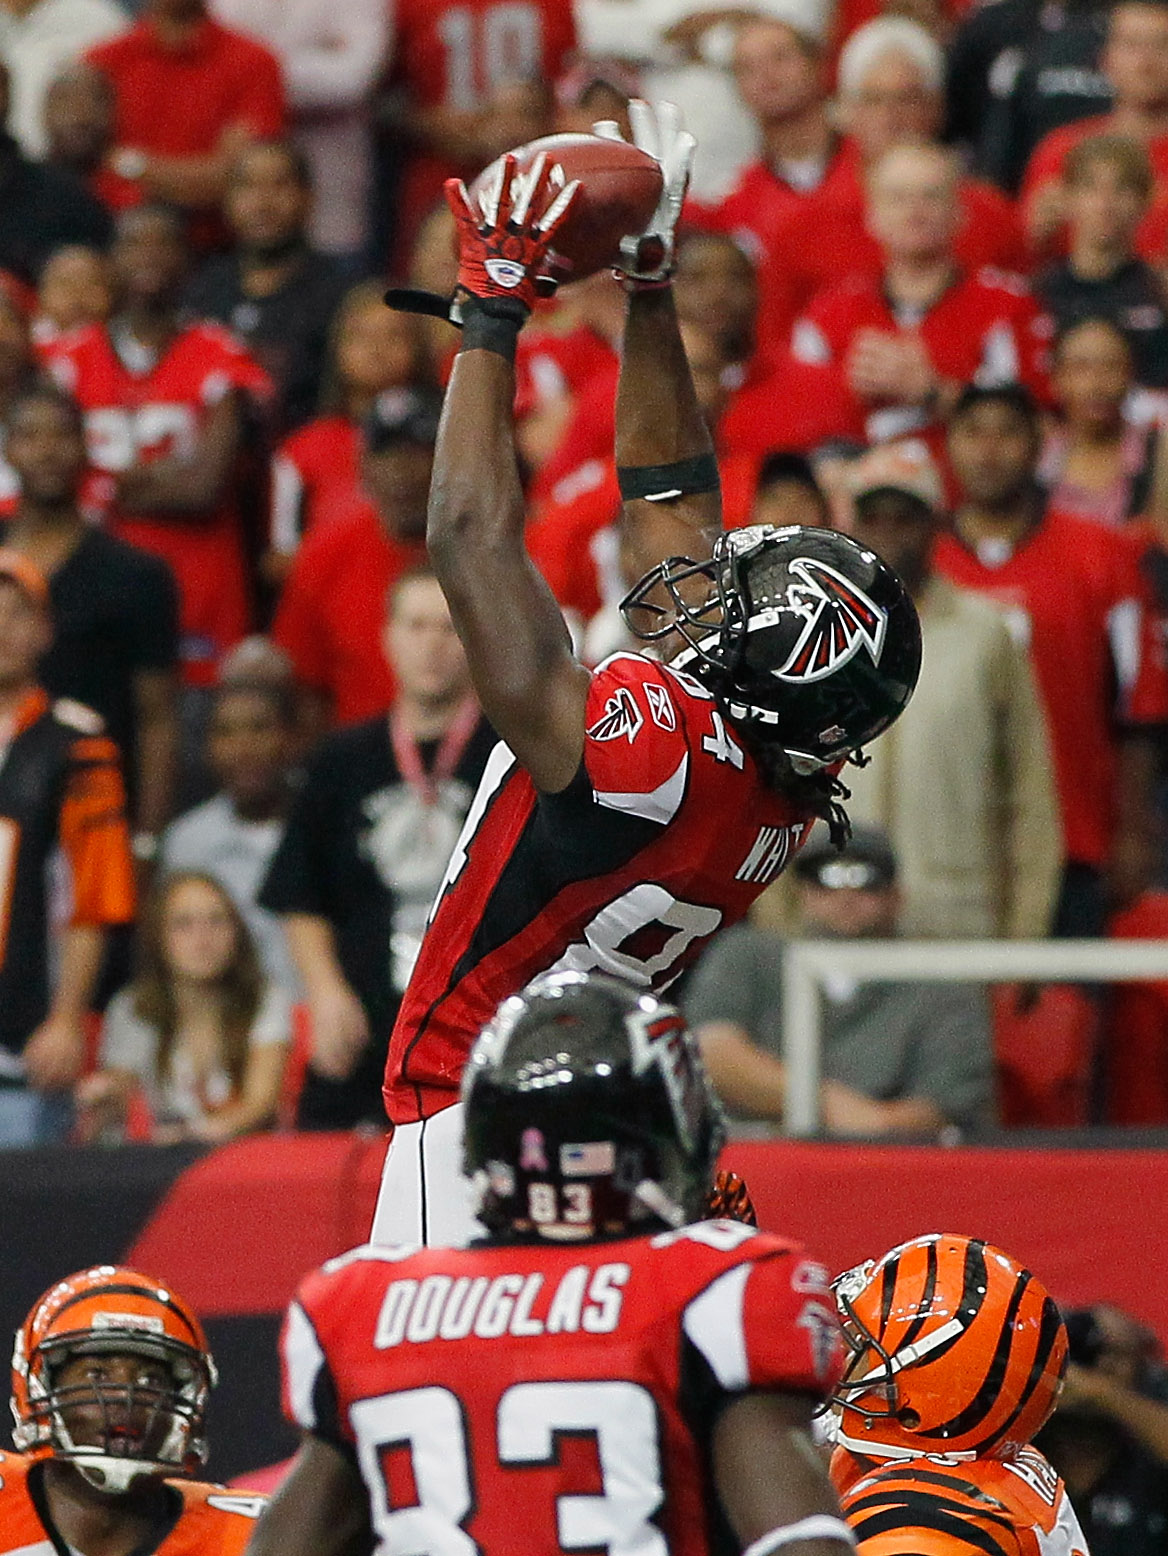 ATLANTA - OCTOBER 24:  Roddy White #84 of the Atlanta Falcons pulls in this two-point conversion against the Cincinnati Bengals at Georgia Dome on October 24, 2010 in Atlanta, Georgia.  (Photo by Kevin C. Cox/Getty Images)